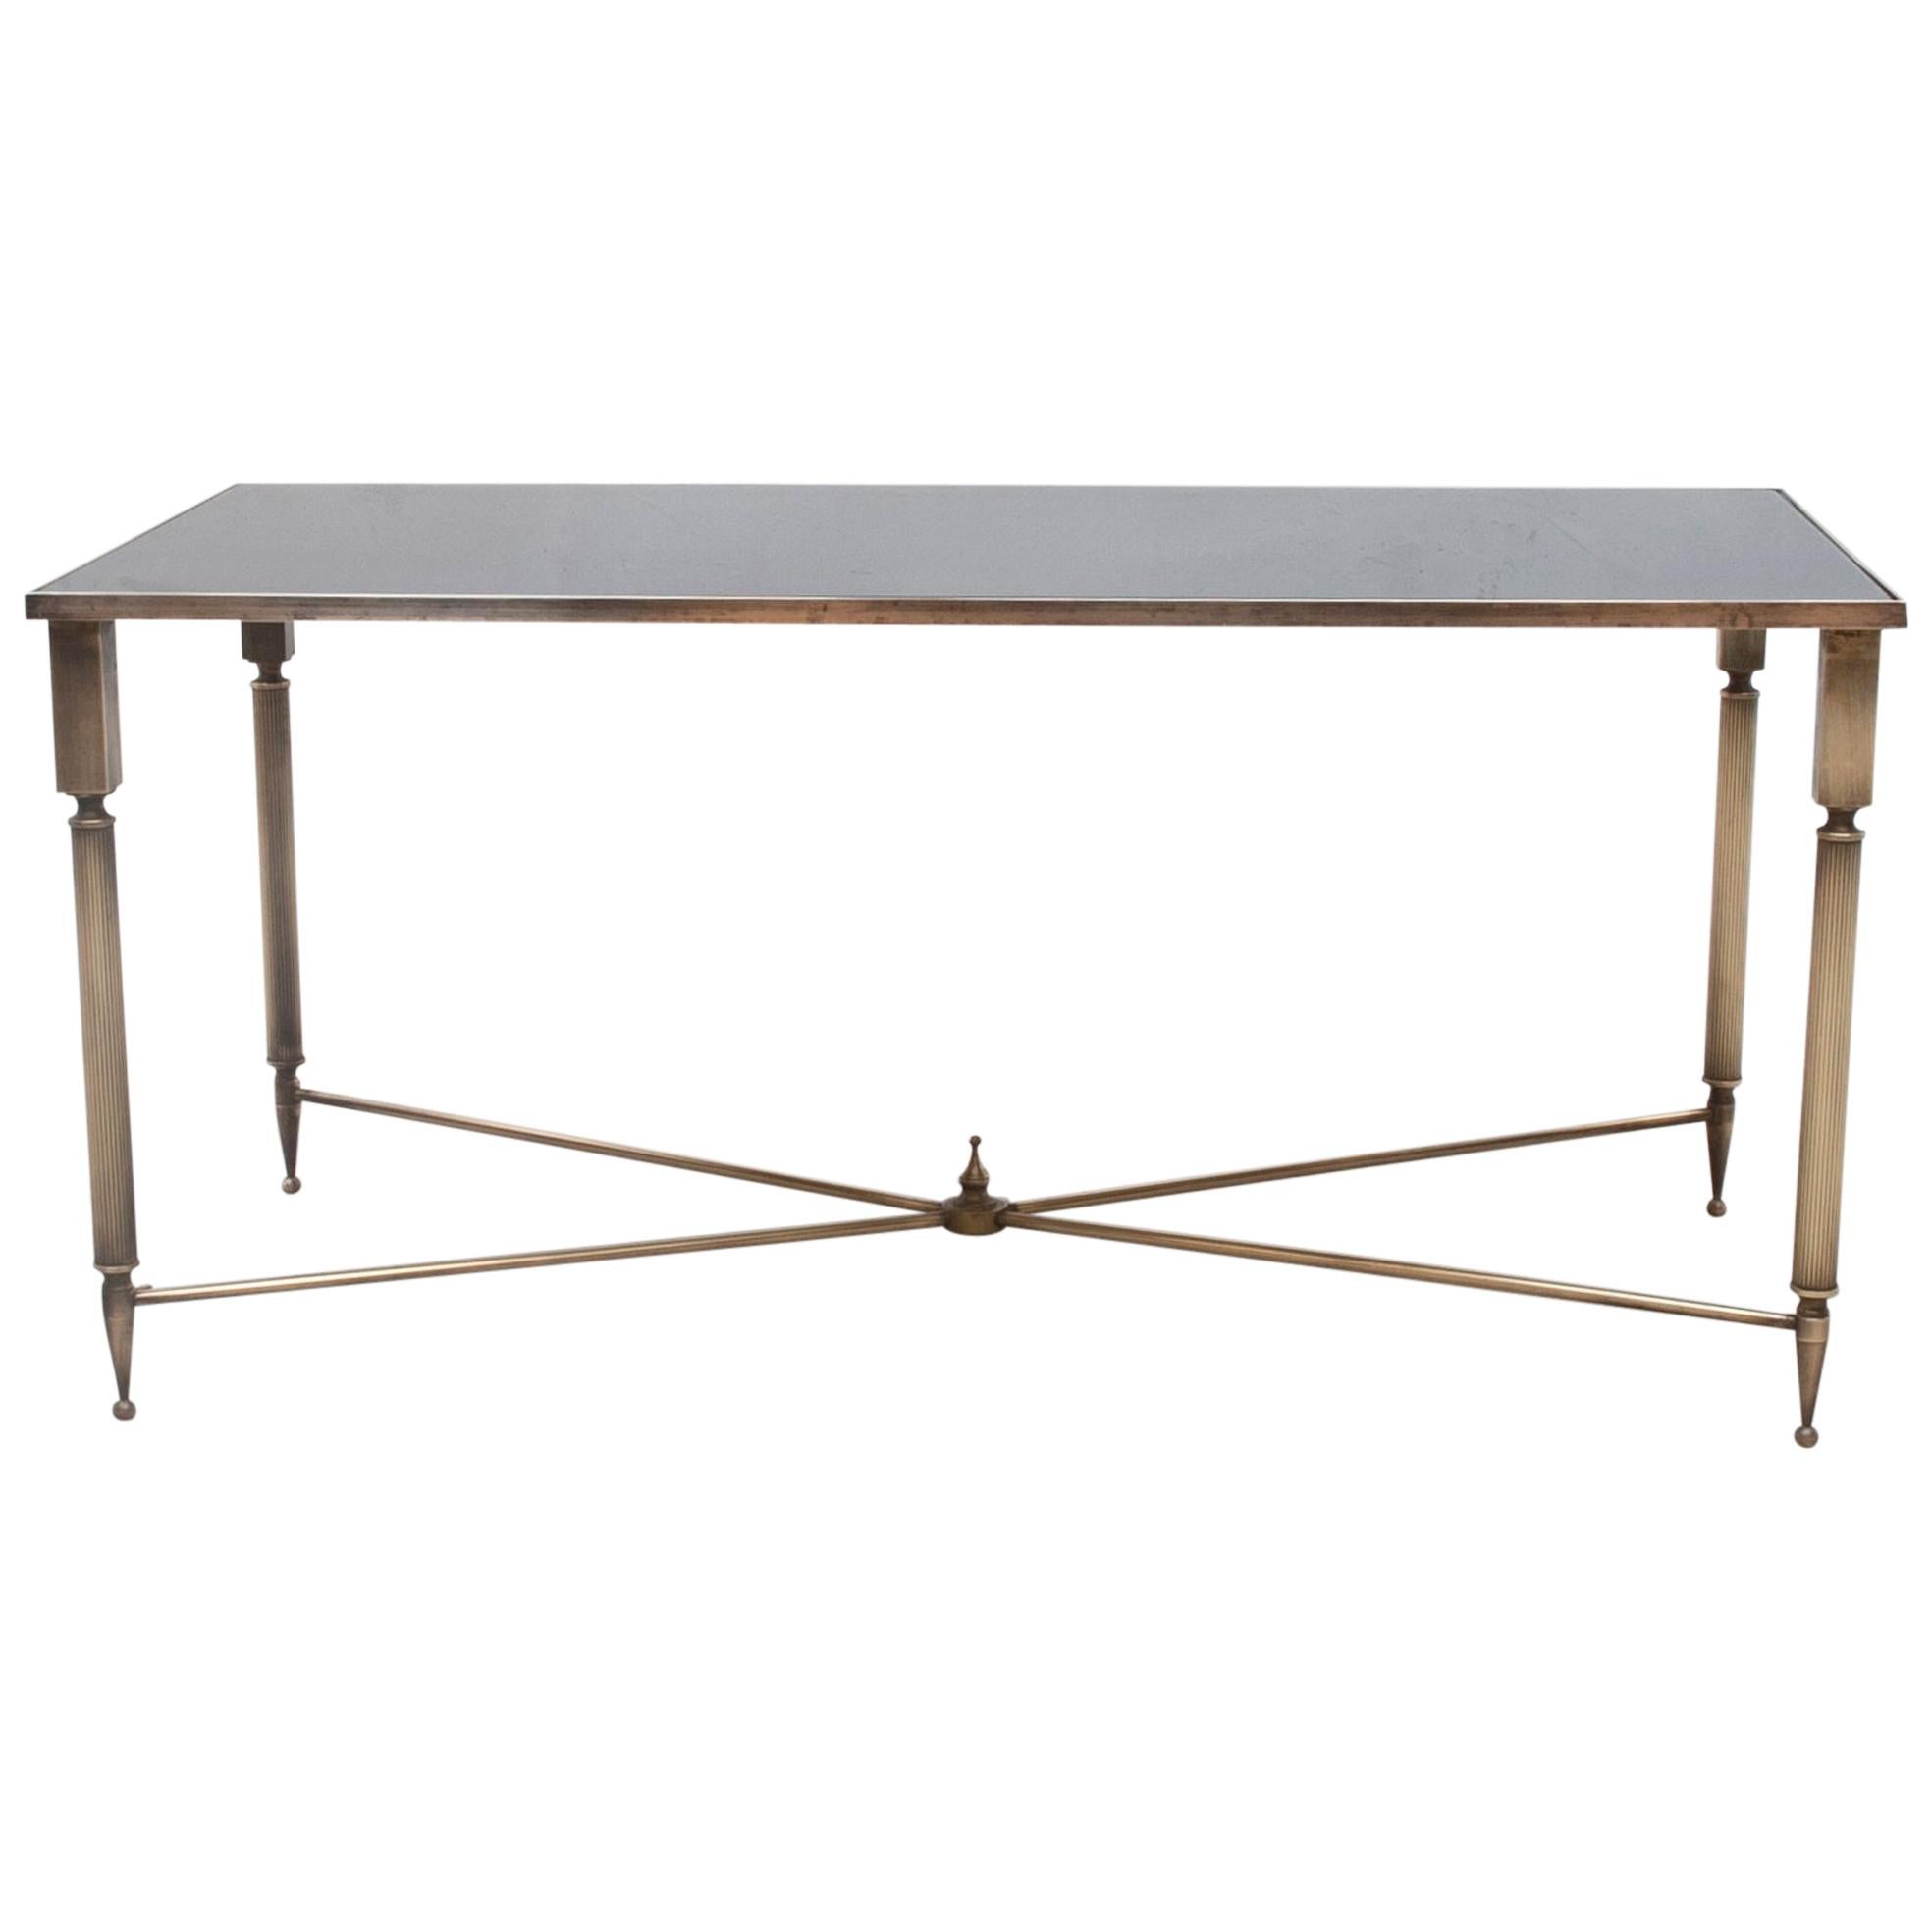 Neoclassical Style Rectangular Coffee Table by Maison Baguès, France, 1940s